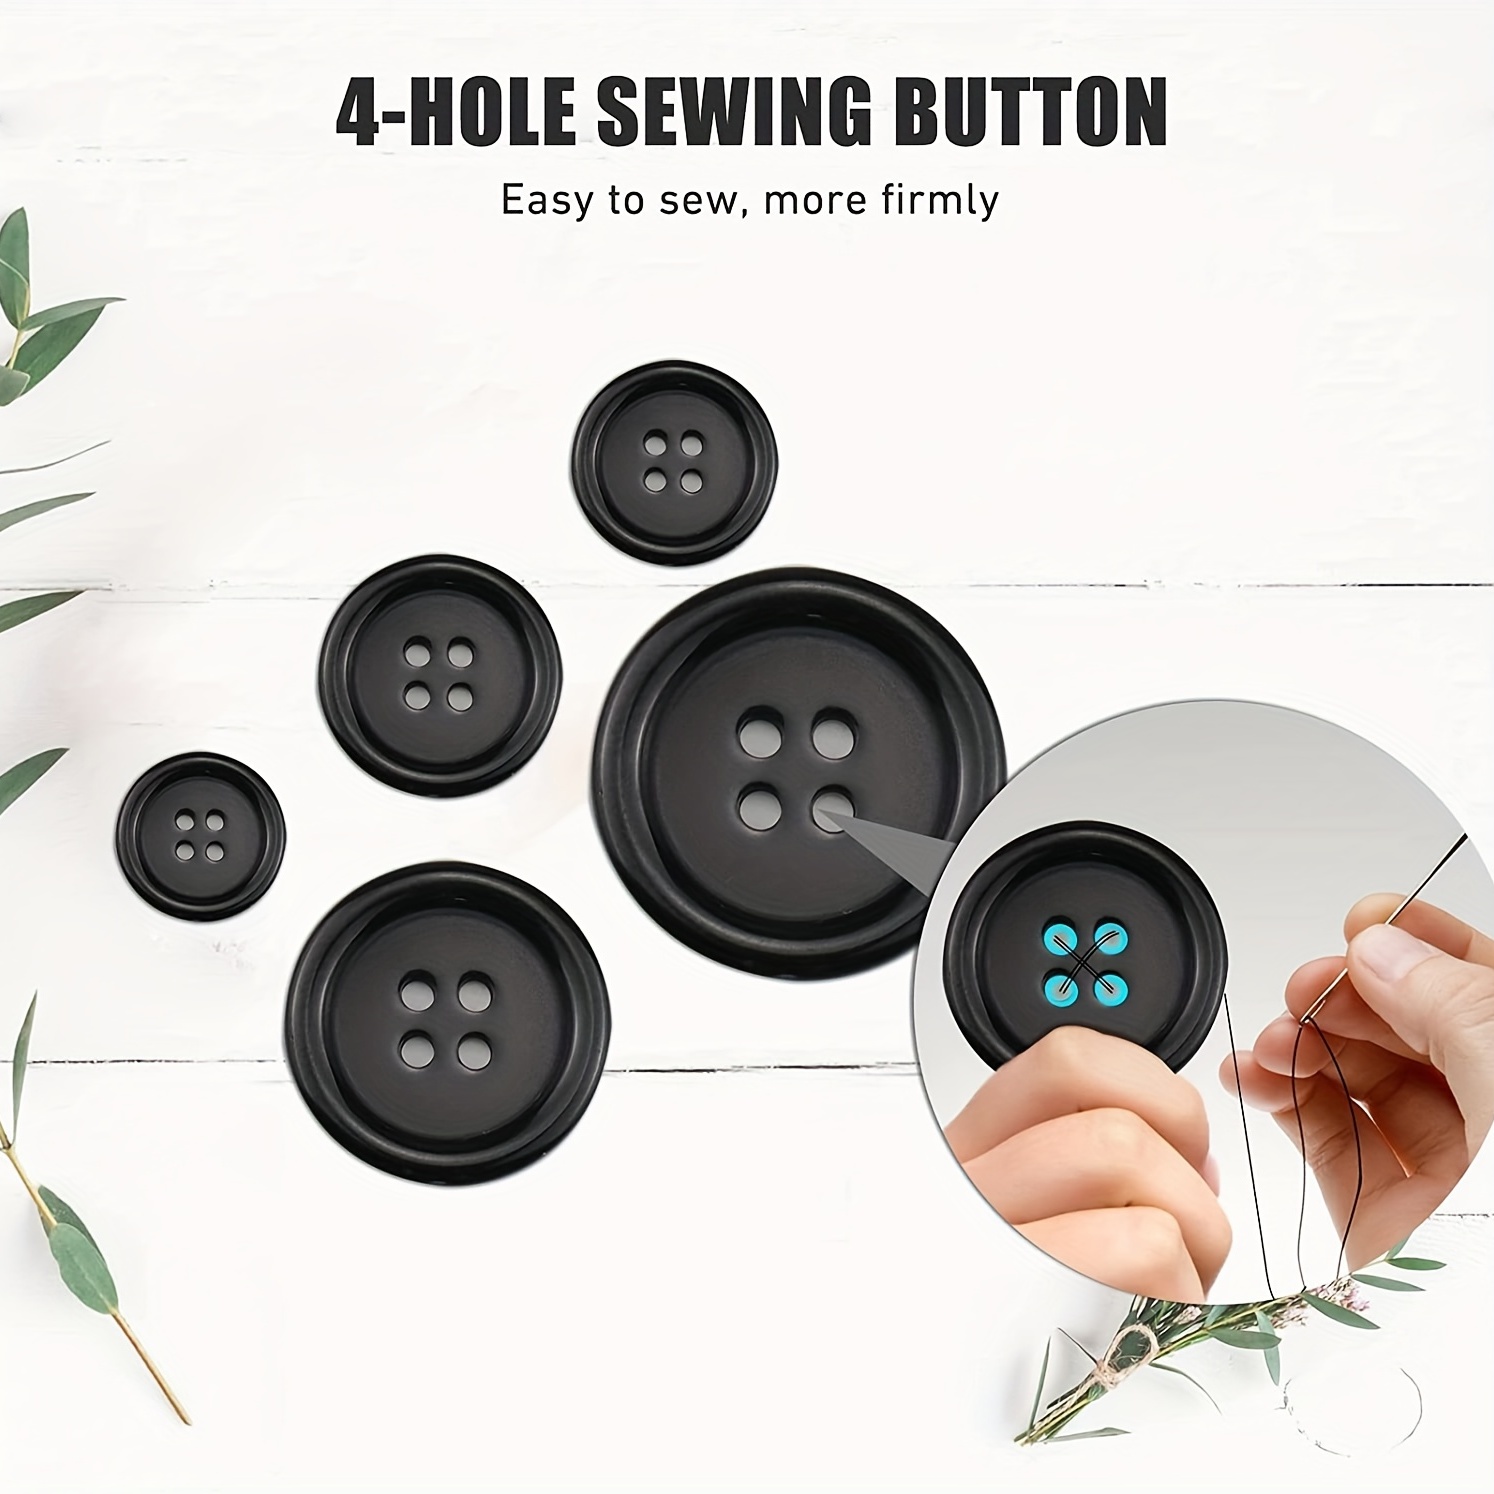 160 Pcs Mixed Sewing Buttons, Black Buttons for Crafts, 4-Hole Buttons for  Sewing, 5 Sizes, Buttons Black, White Button, Small Black and White